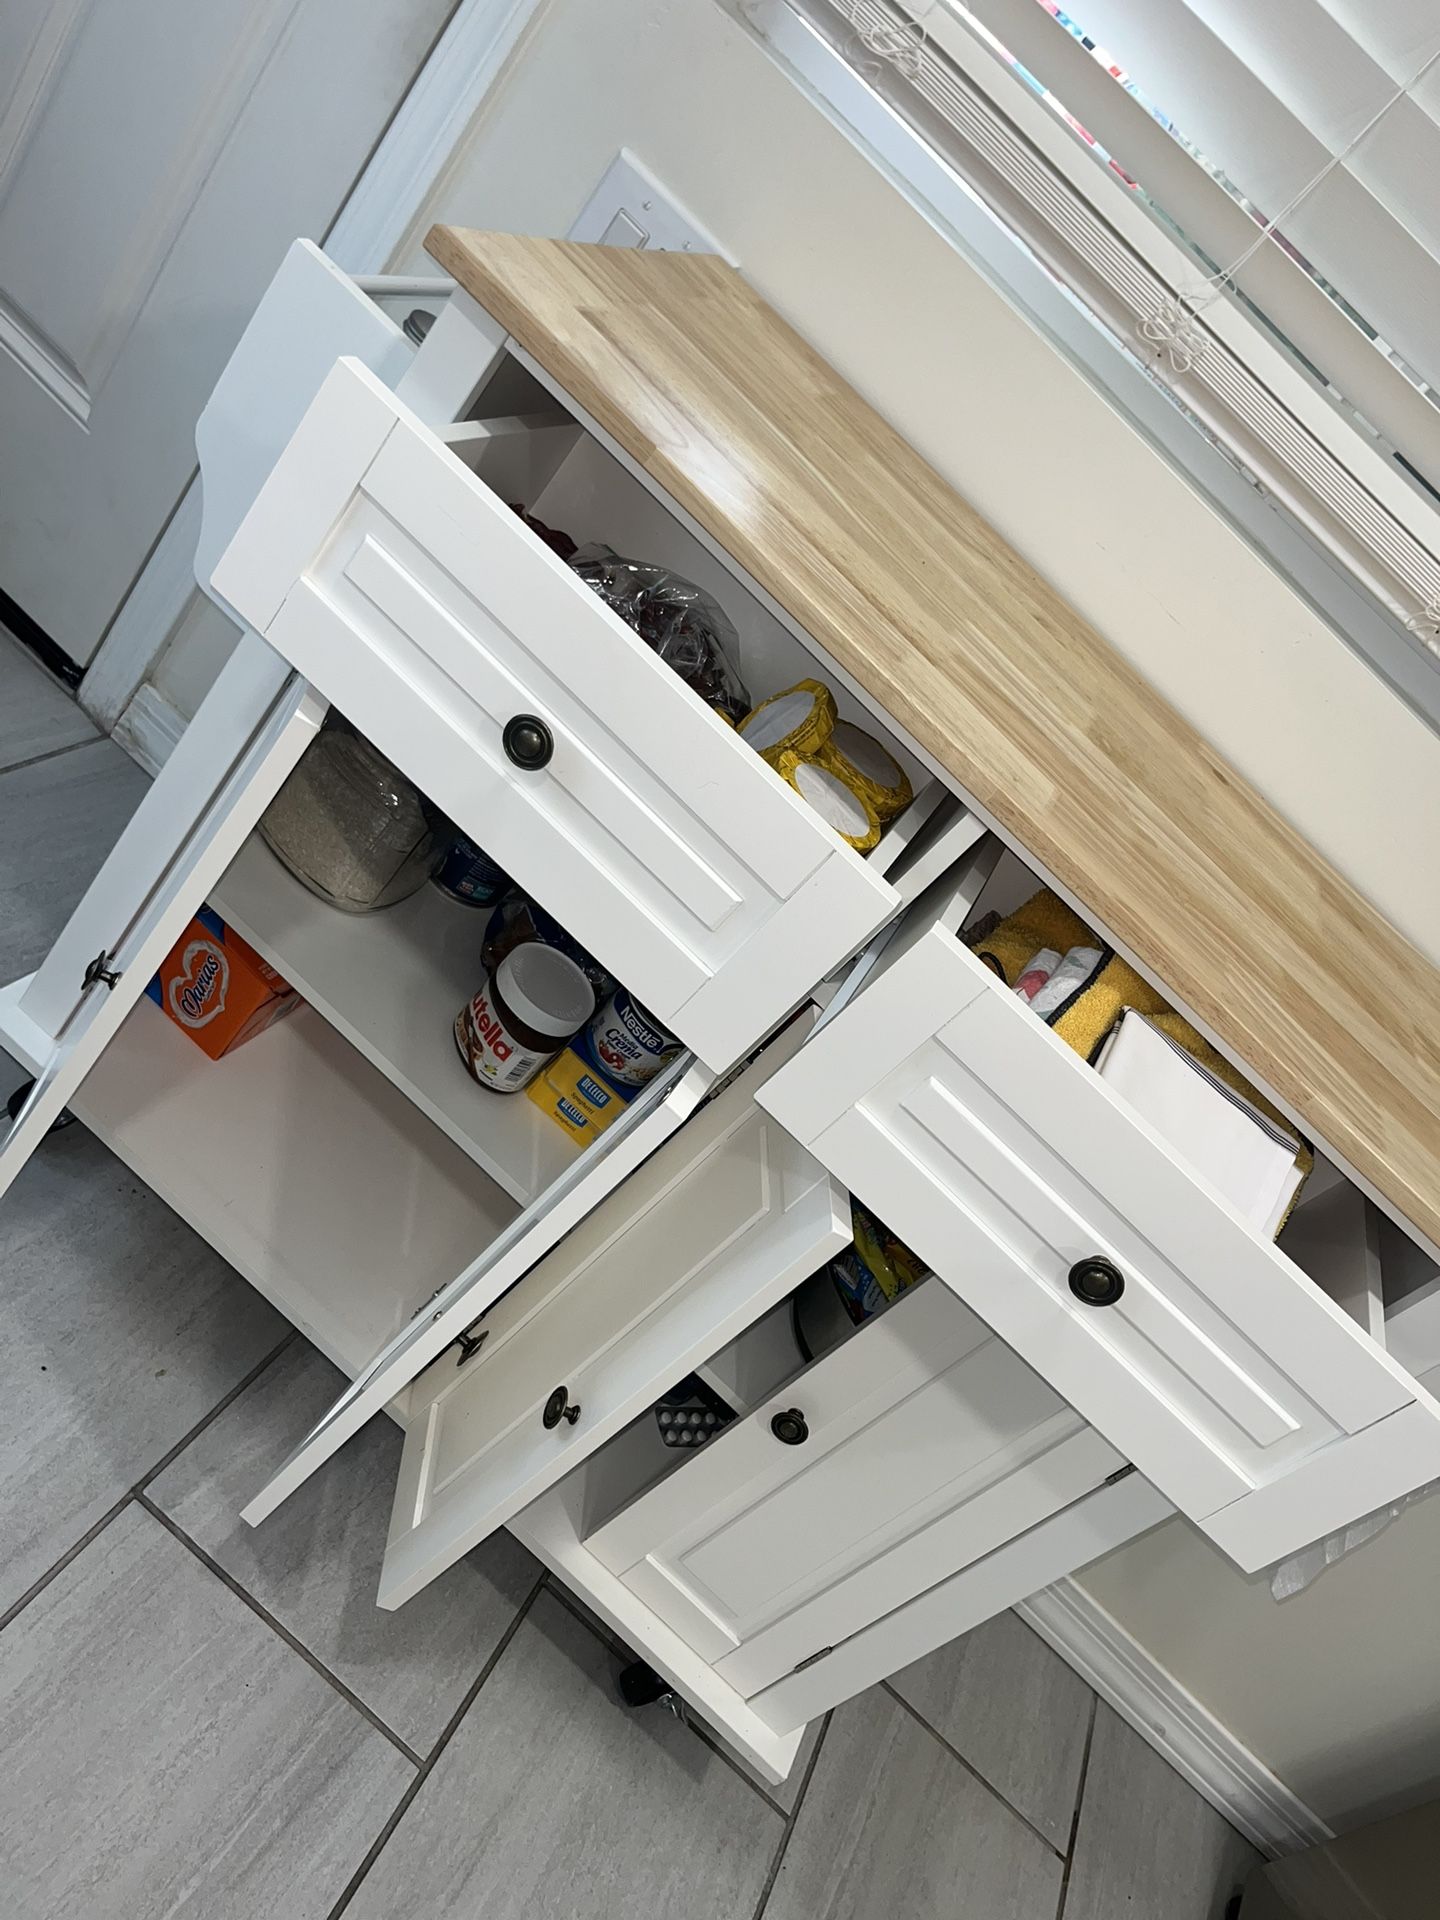 Kitchen furniture and can be used as a table